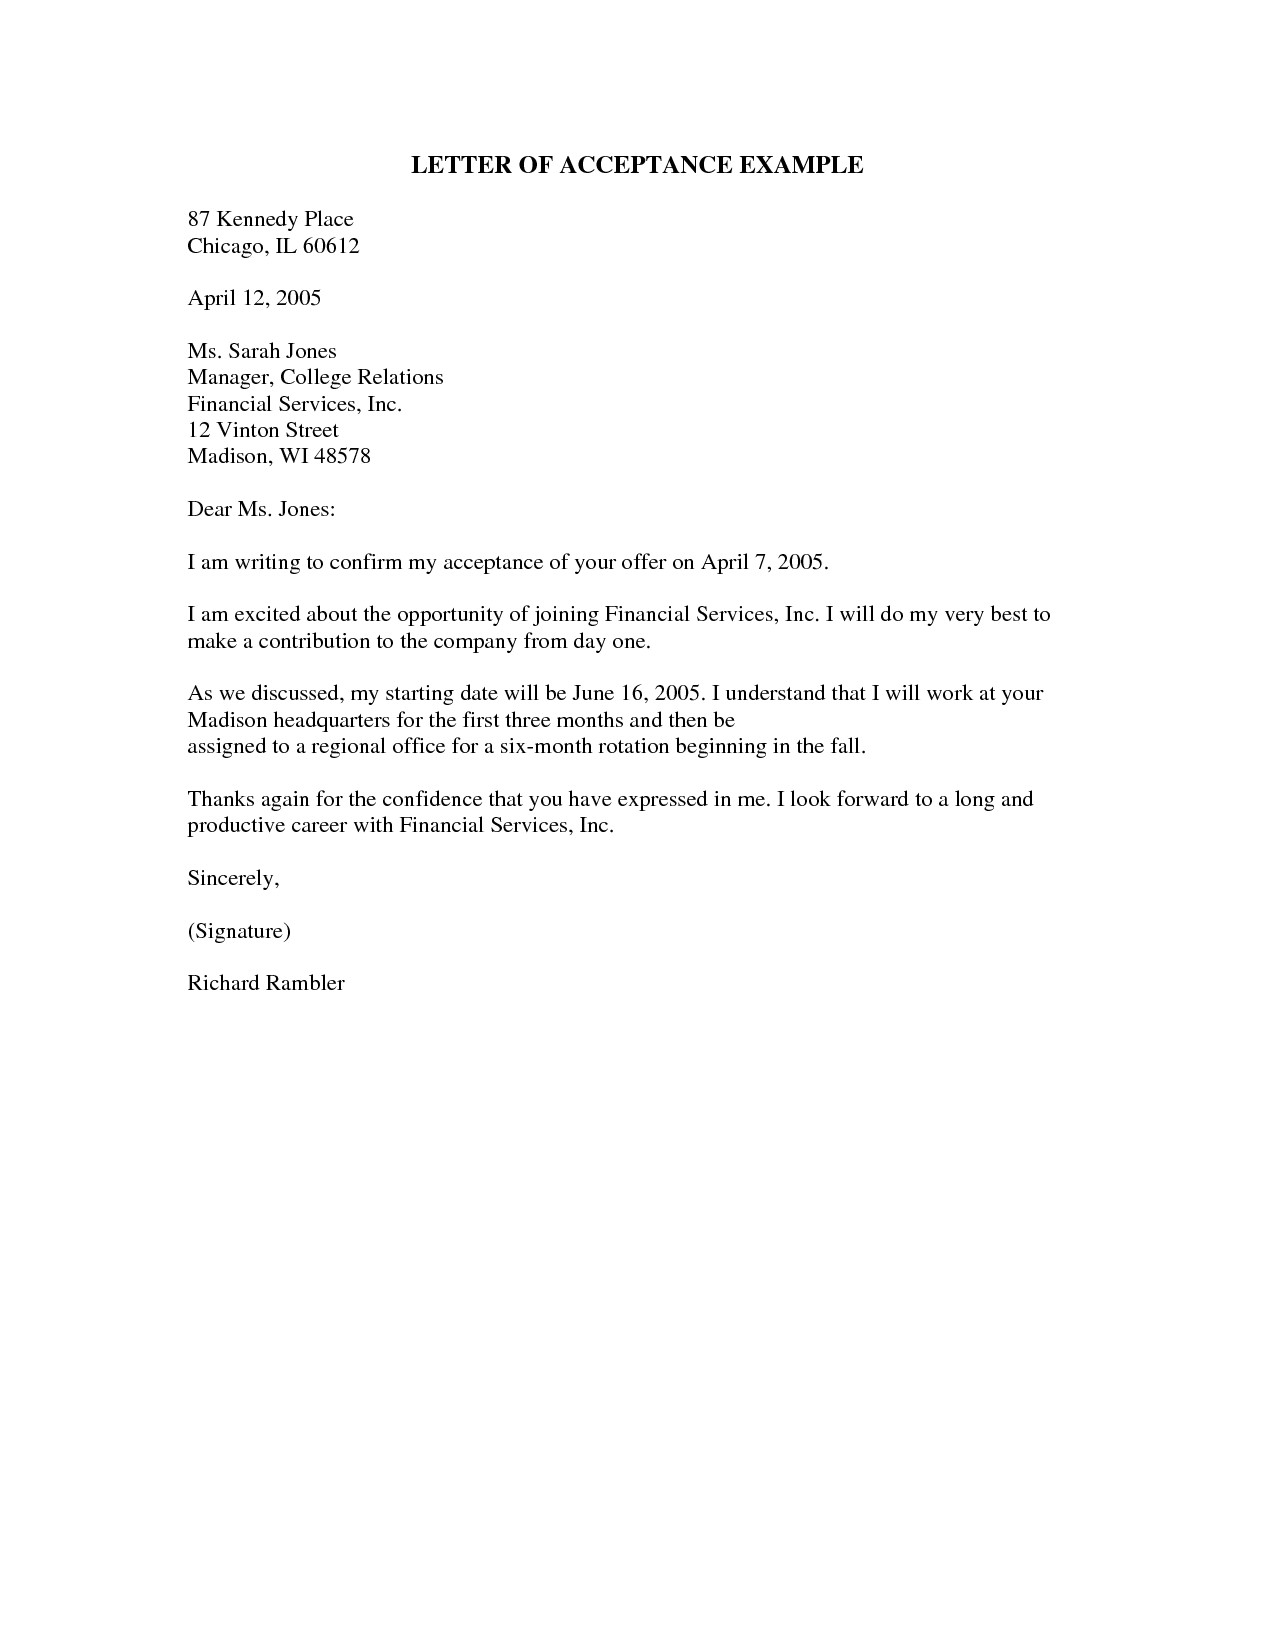 Good News Letter Template Business Good News Letter Example Letters Free Sample